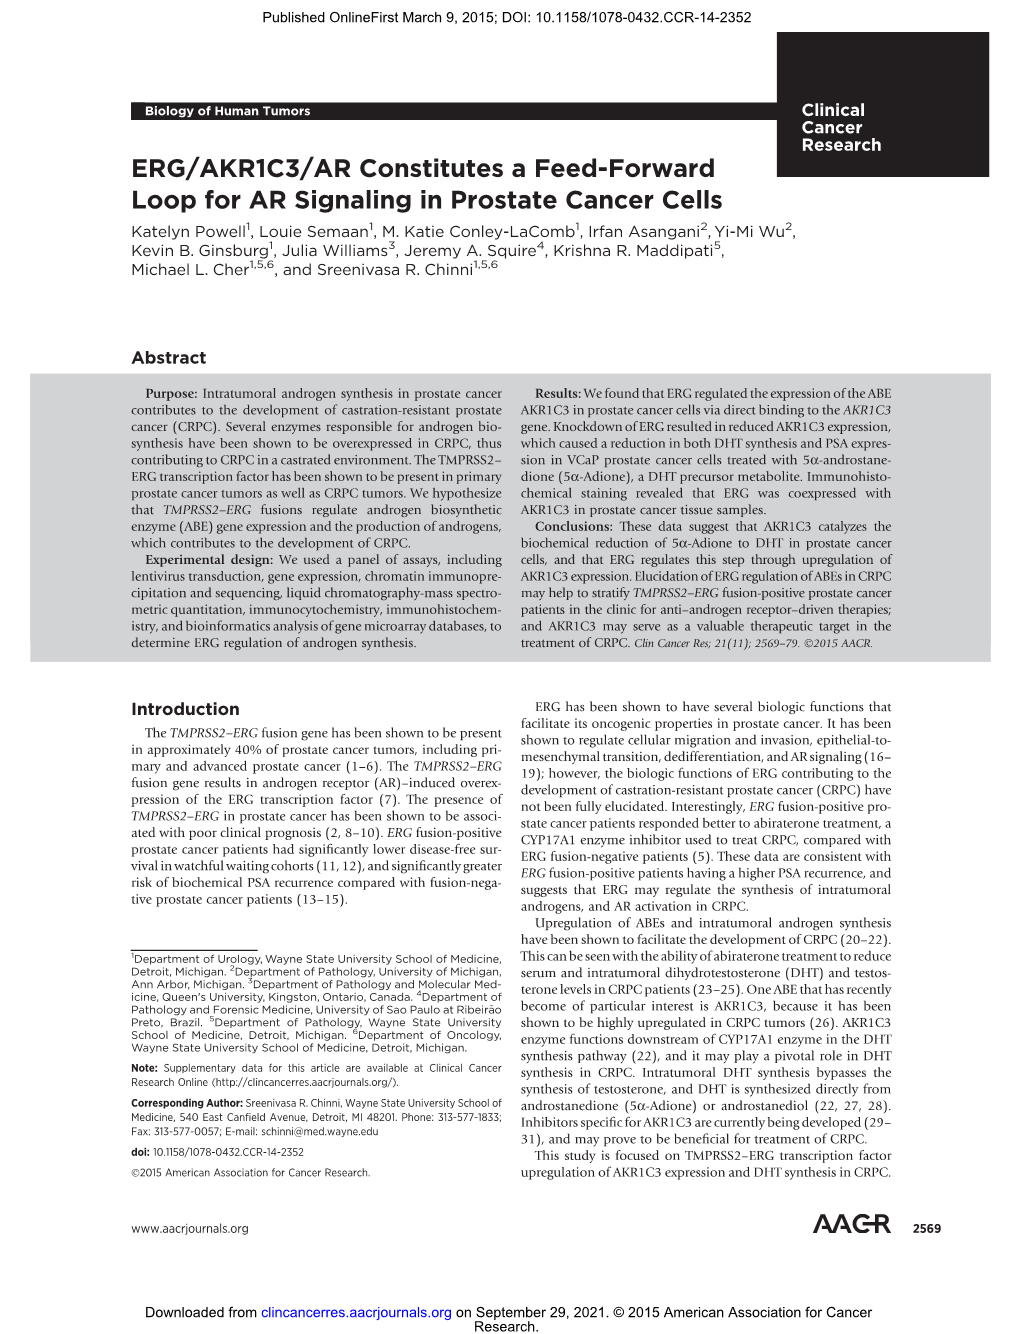 ERG/AKR1C3/AR Constitutes a Feed-Forward Loop for AR Signaling in Prostate Cancer Cells Katelyn Powell1, Louie Semaan1, M